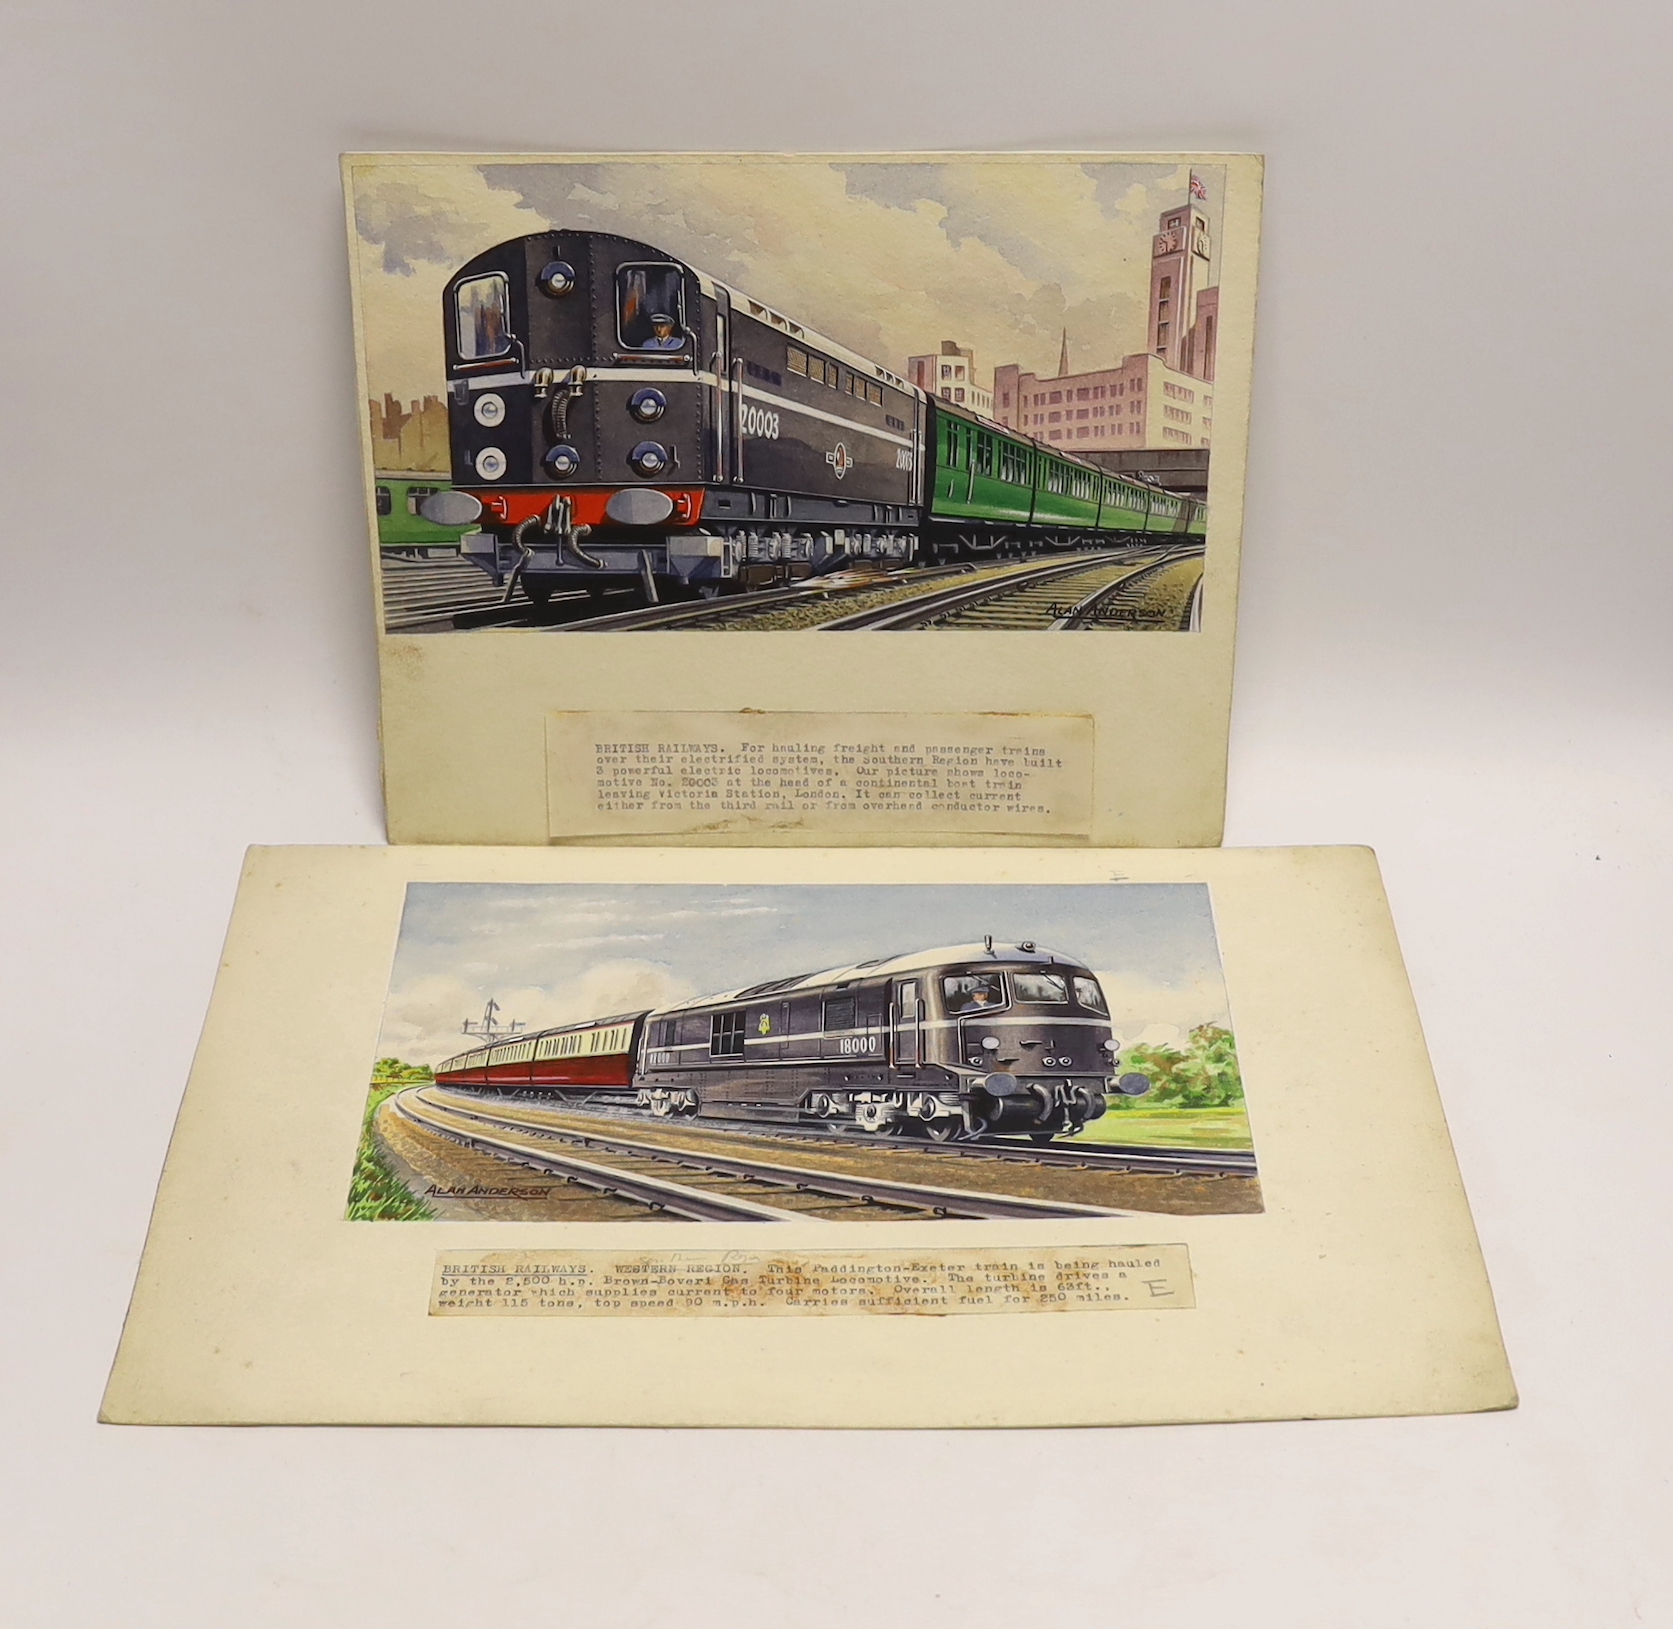 Alan Anderson, two watercolours, a BR Class 70 electric locomotive leaving Victoria Station, and a gas turbine locomotive 18000, 15.5 x 27cm, both signed